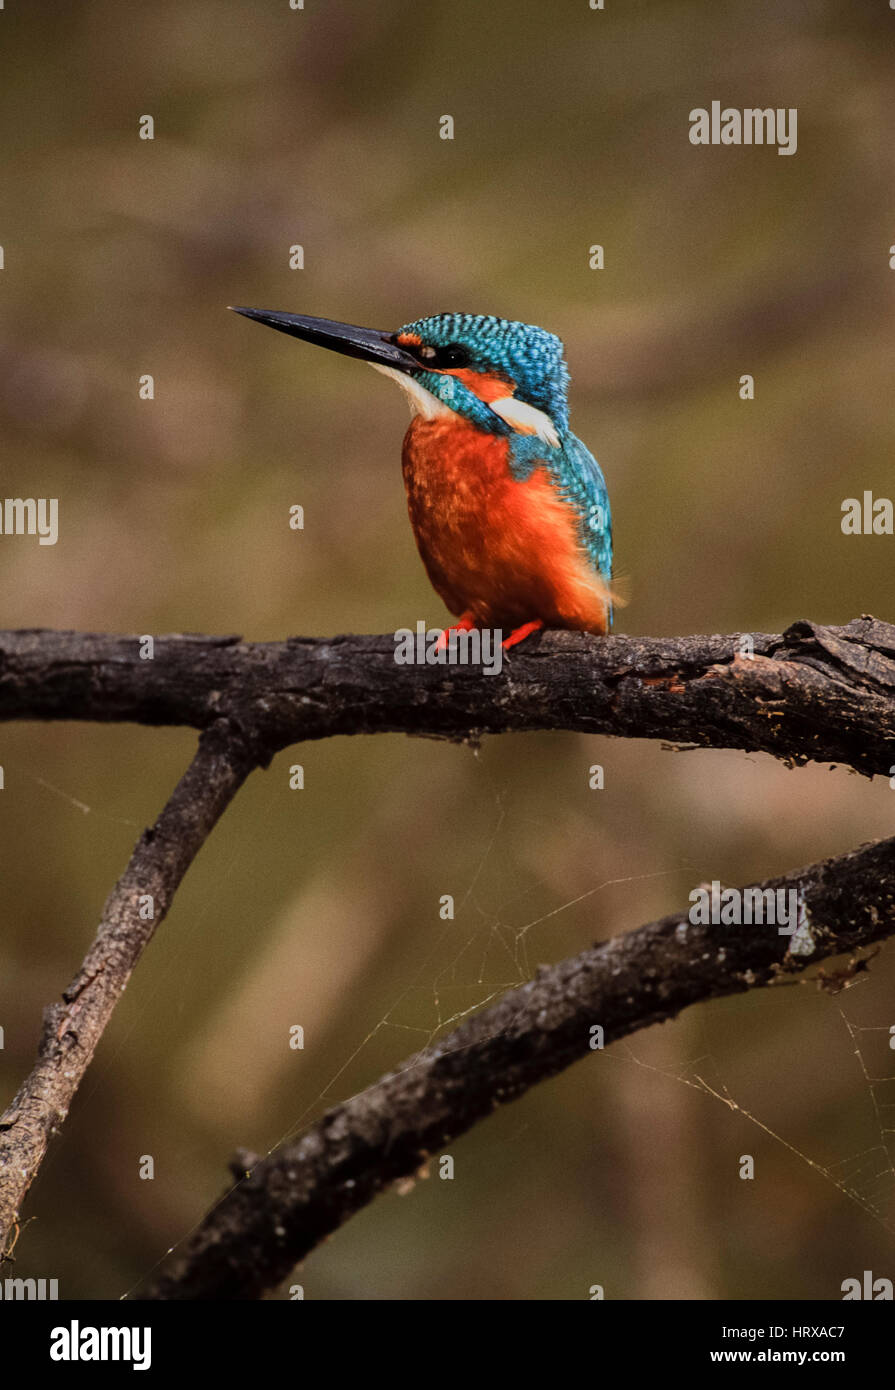 Common kingfisher, (Alcedo atthis), perched on branch, Keoladeo Ghana National Park, Bharatpur, Rajasthan, India Stock Photo